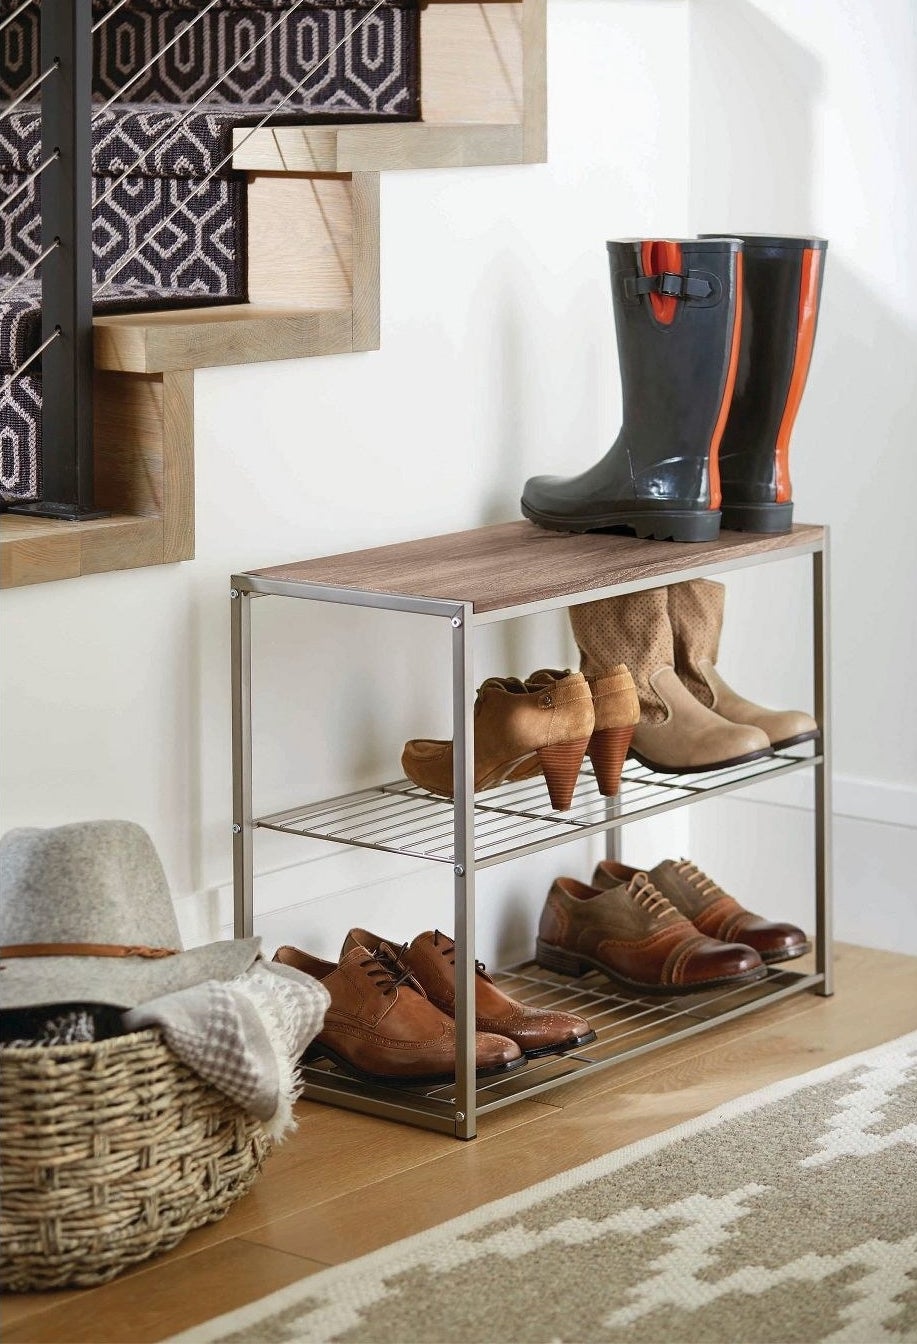 The rack, which has open two wire shelves, and is topped with a solid wood-finish shelf